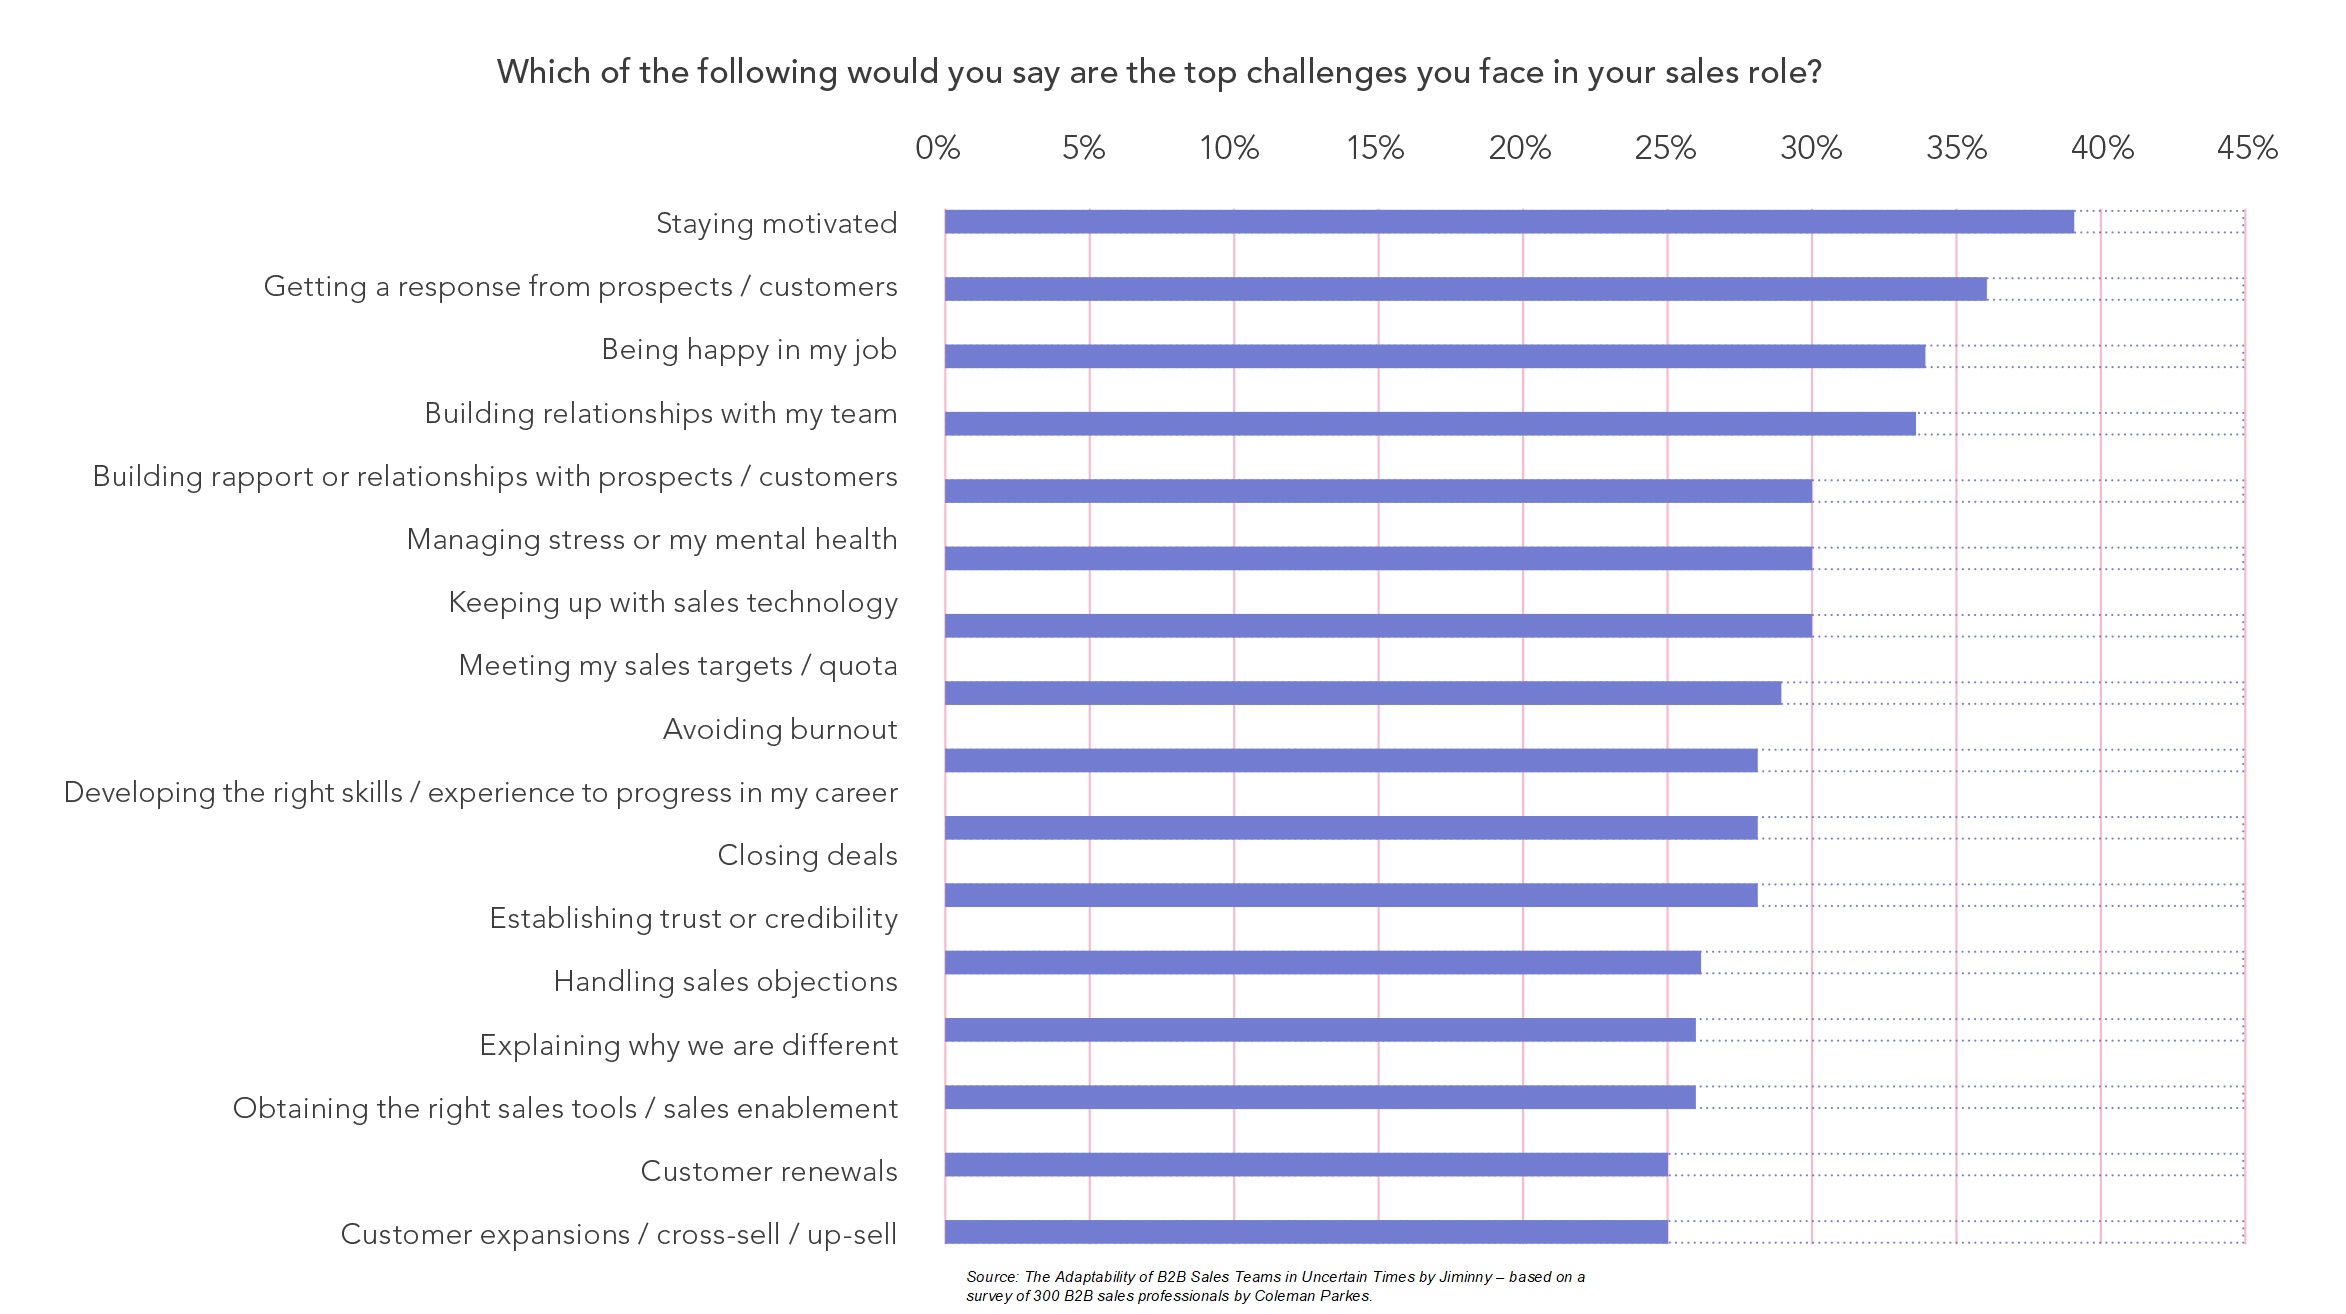 Top B2B sales challenges: “staying motivated” (39%), followed by “getting a response from prospects / customers” (36%) and “being happy in my job” (34%).